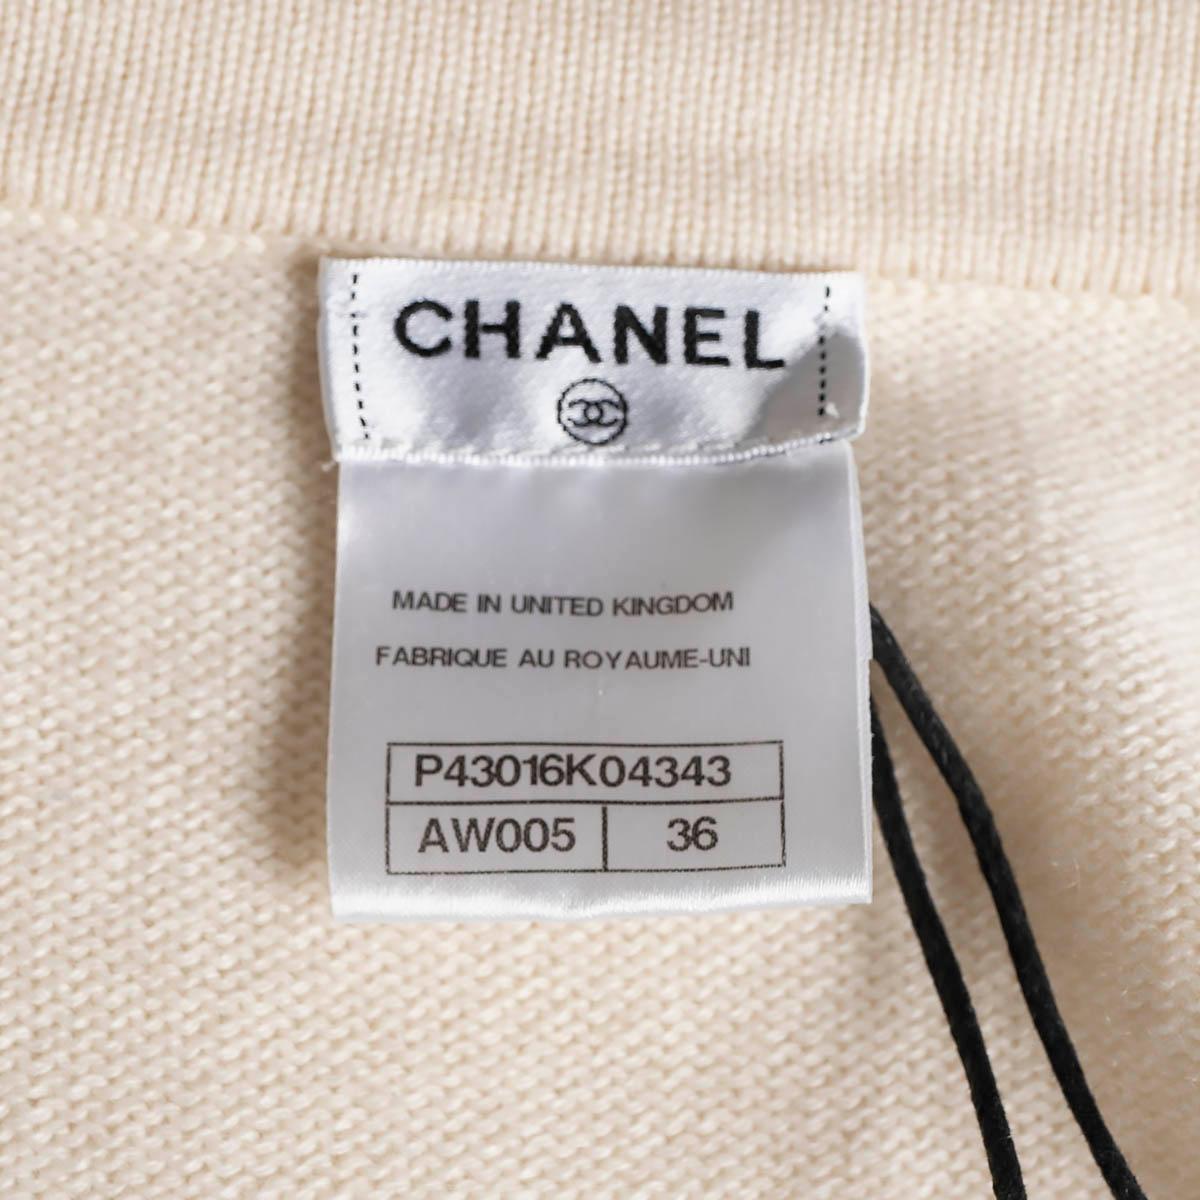 CHANEL cream cashmere 2012 12C FLORAL BEADED Cardigan Sweater 36 XS For Sale 4